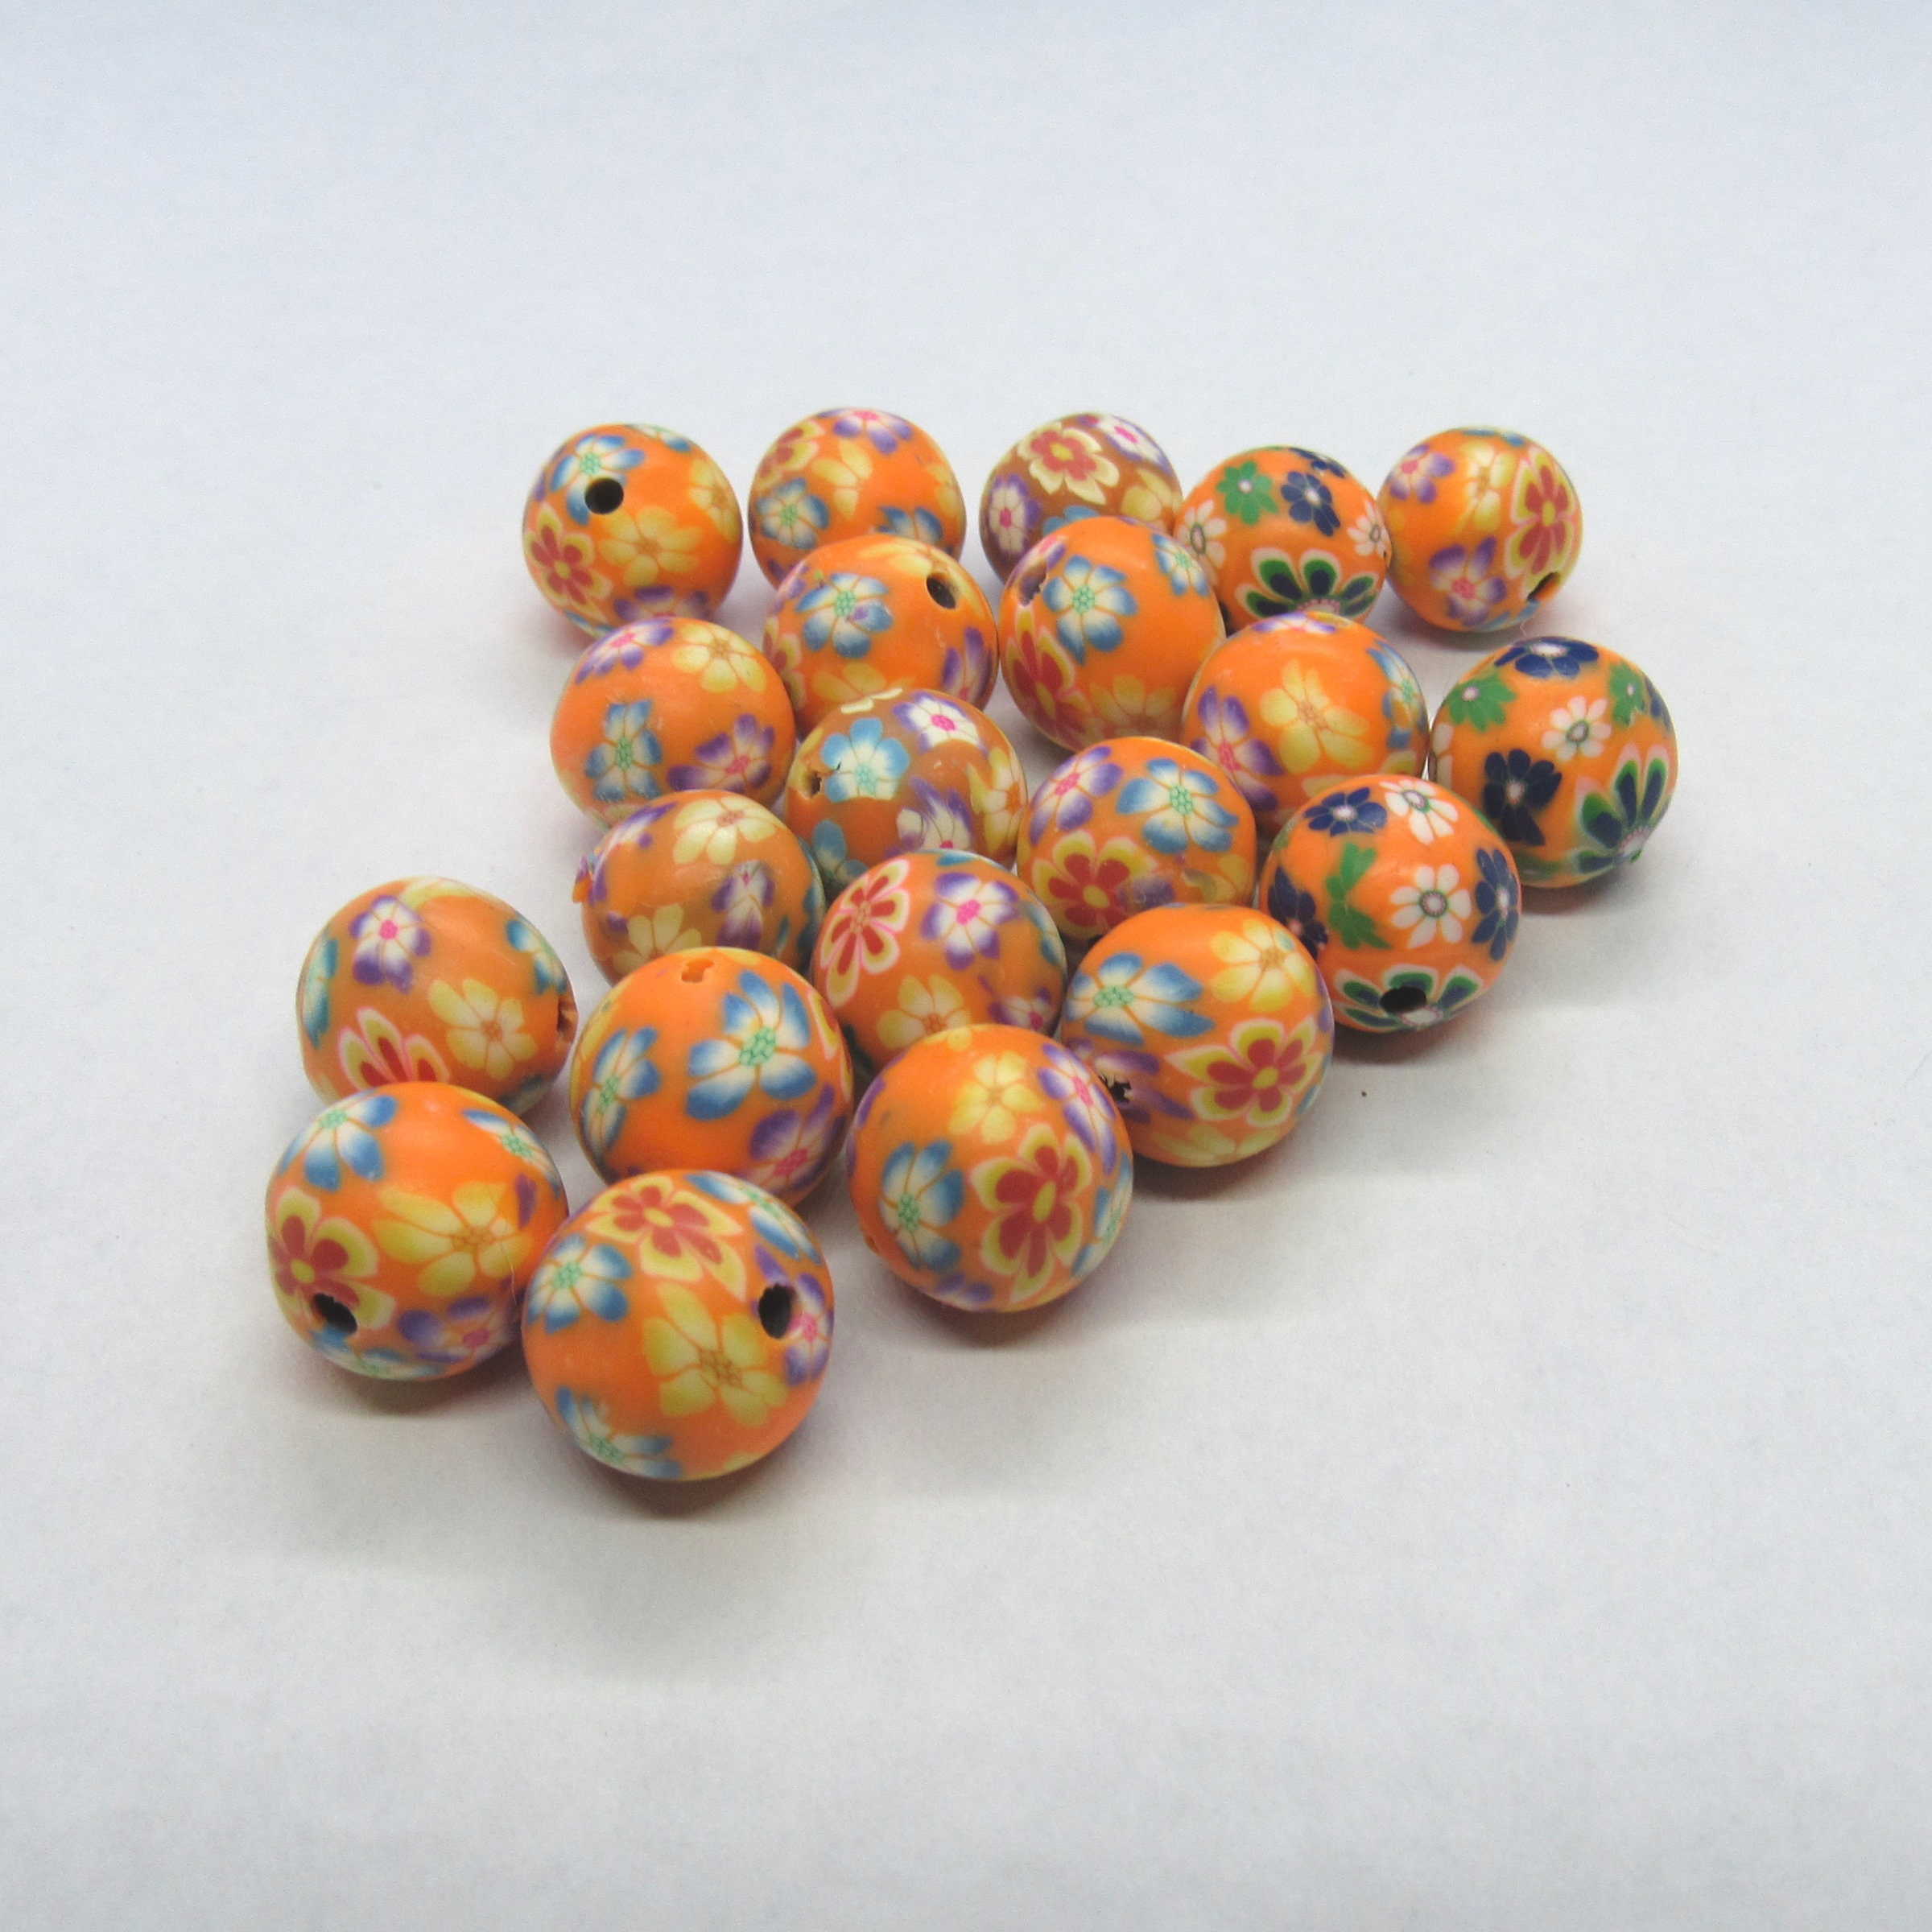 20pcs Choice of Color 11-12mm Handmade Round Polymer Clay Beads a161g 